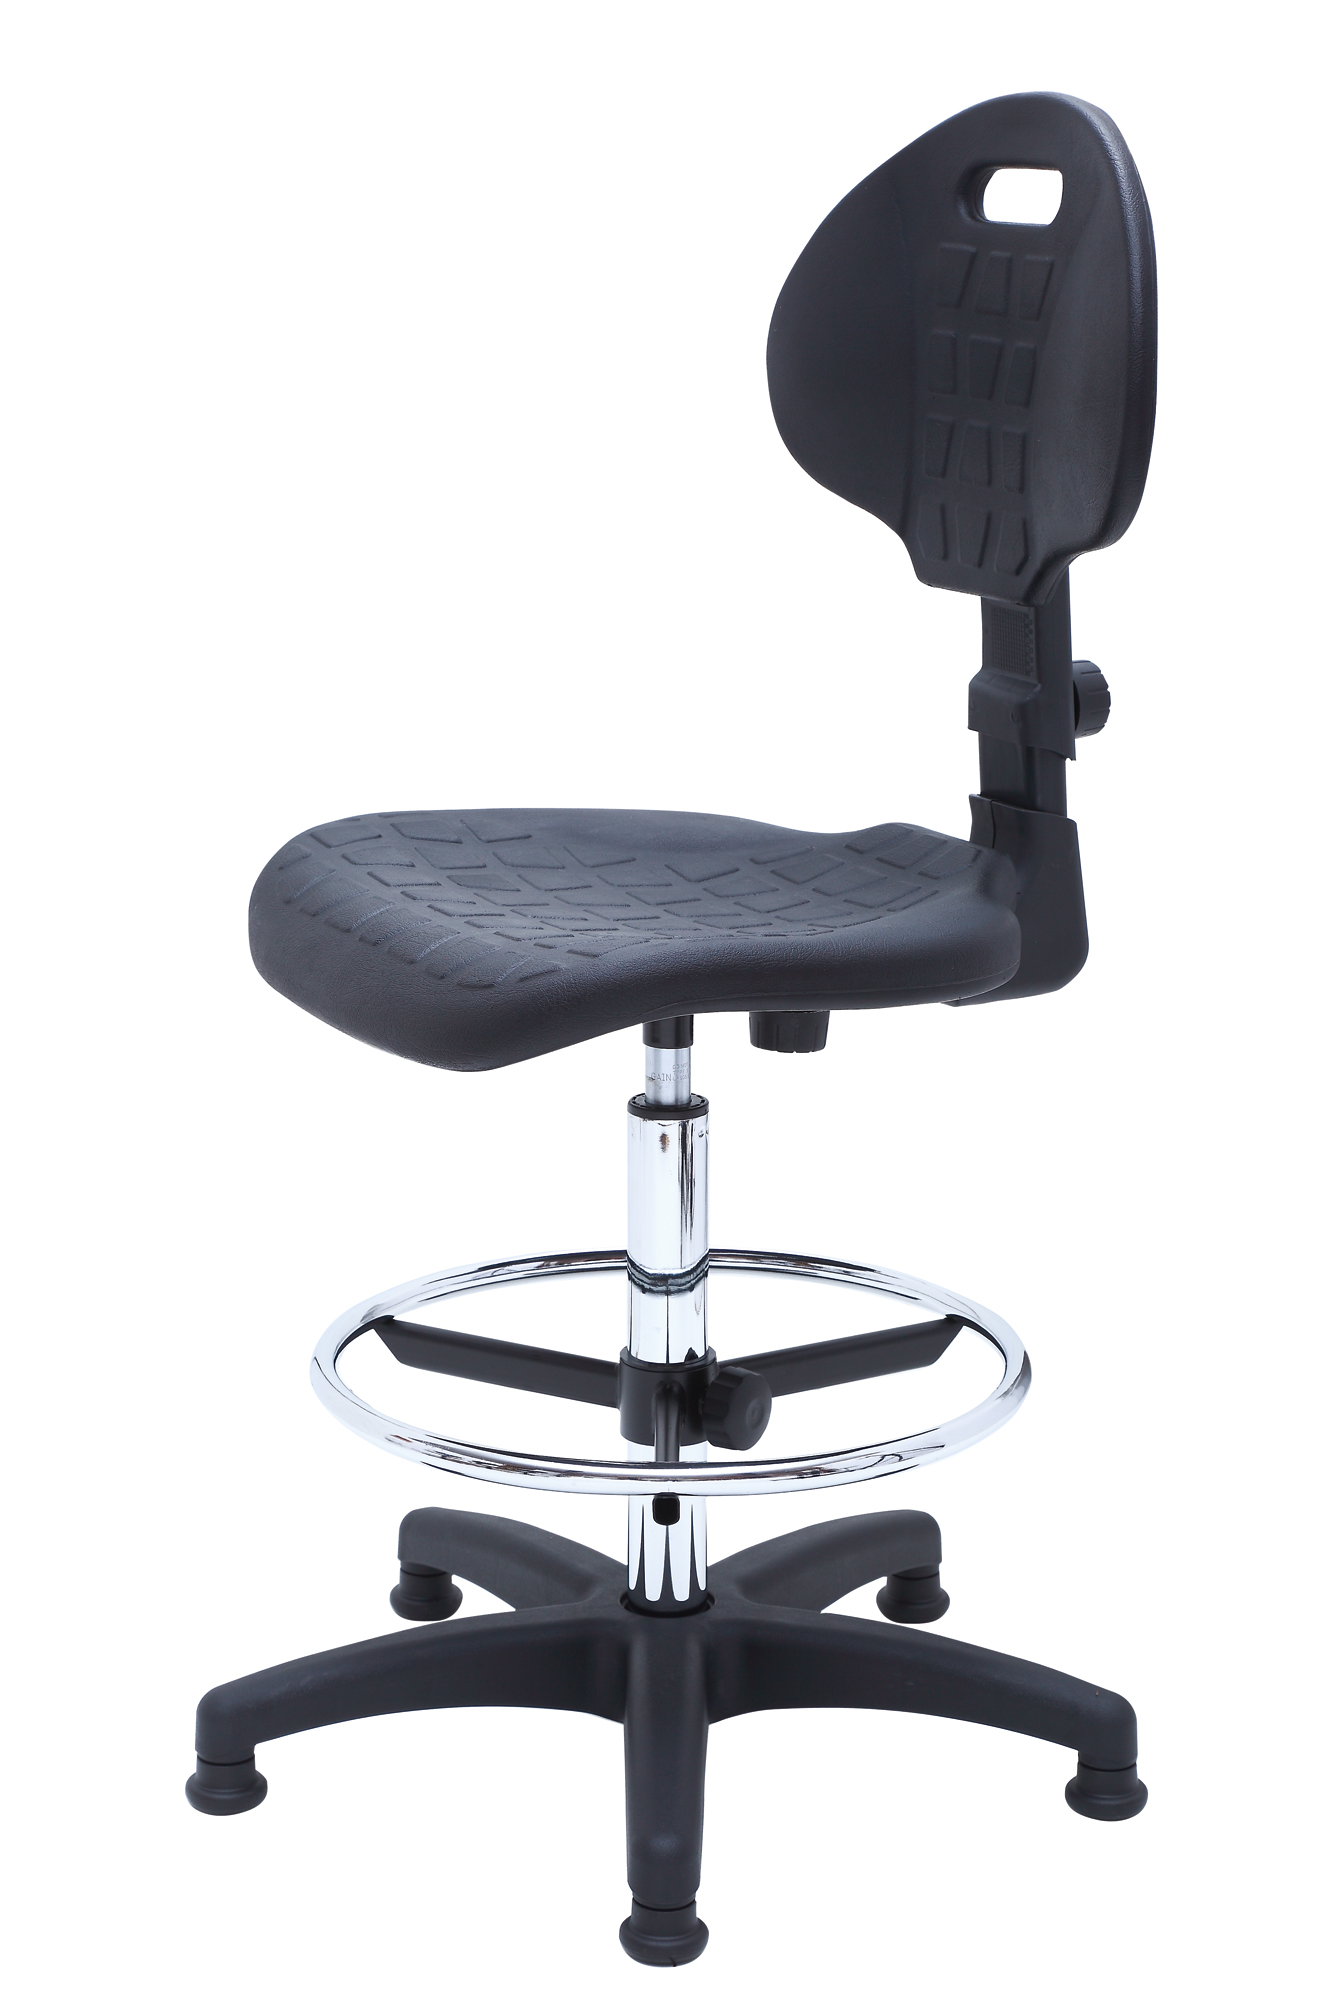 Ergowork ESD Swivel Chair with Glides ESD Chair PRO Special CHCPT Antistatic Chair ESD Products AES